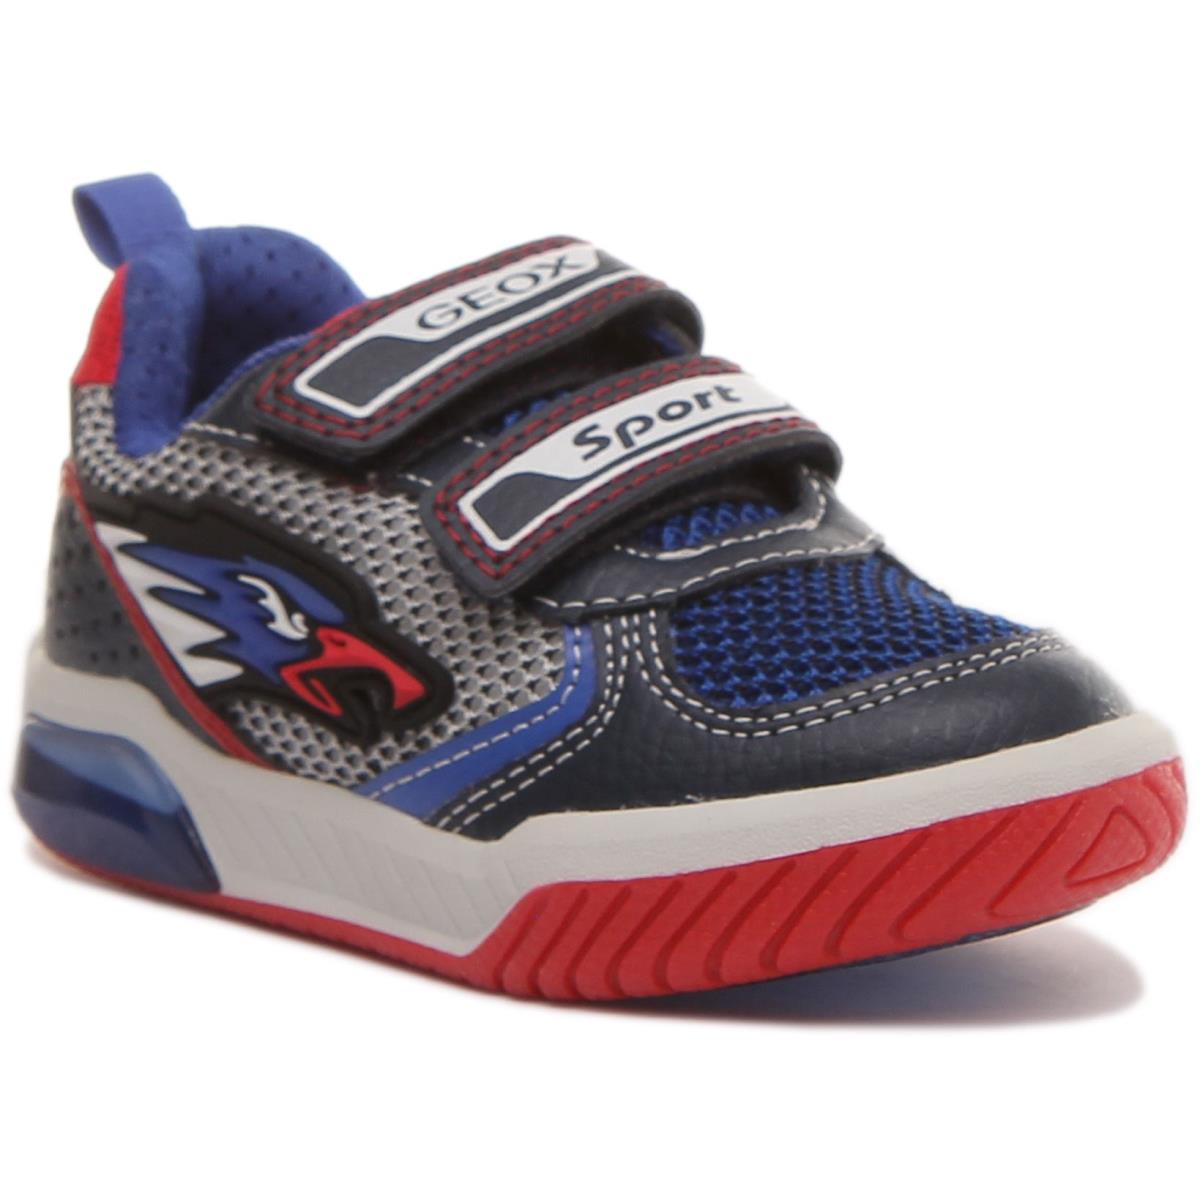 Geox J Inek B. B Kids Two Strap Led Light Sneakers In Navy Yellow Size US 8 - 13 NAVY RED